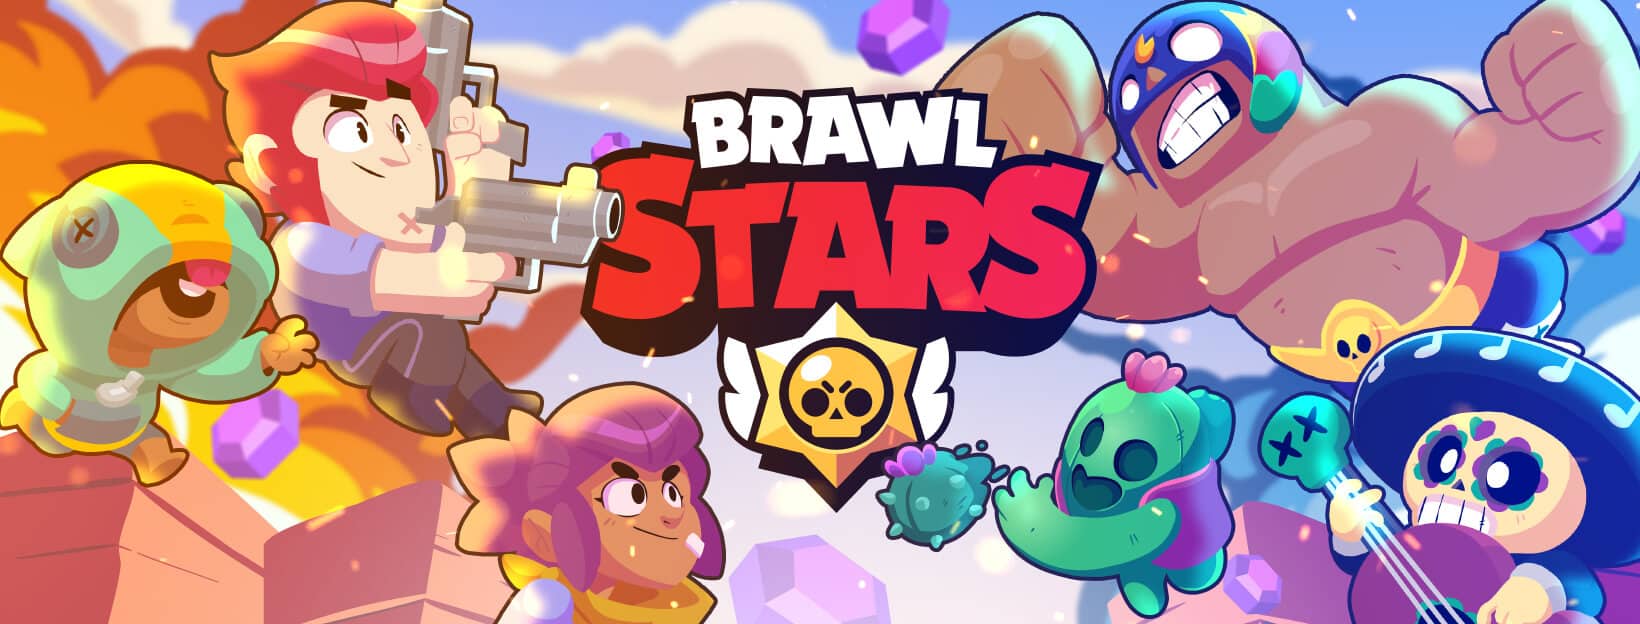 Parent S Guide Is Brawl Stars Safe For Your Kids - brawl stars box contents